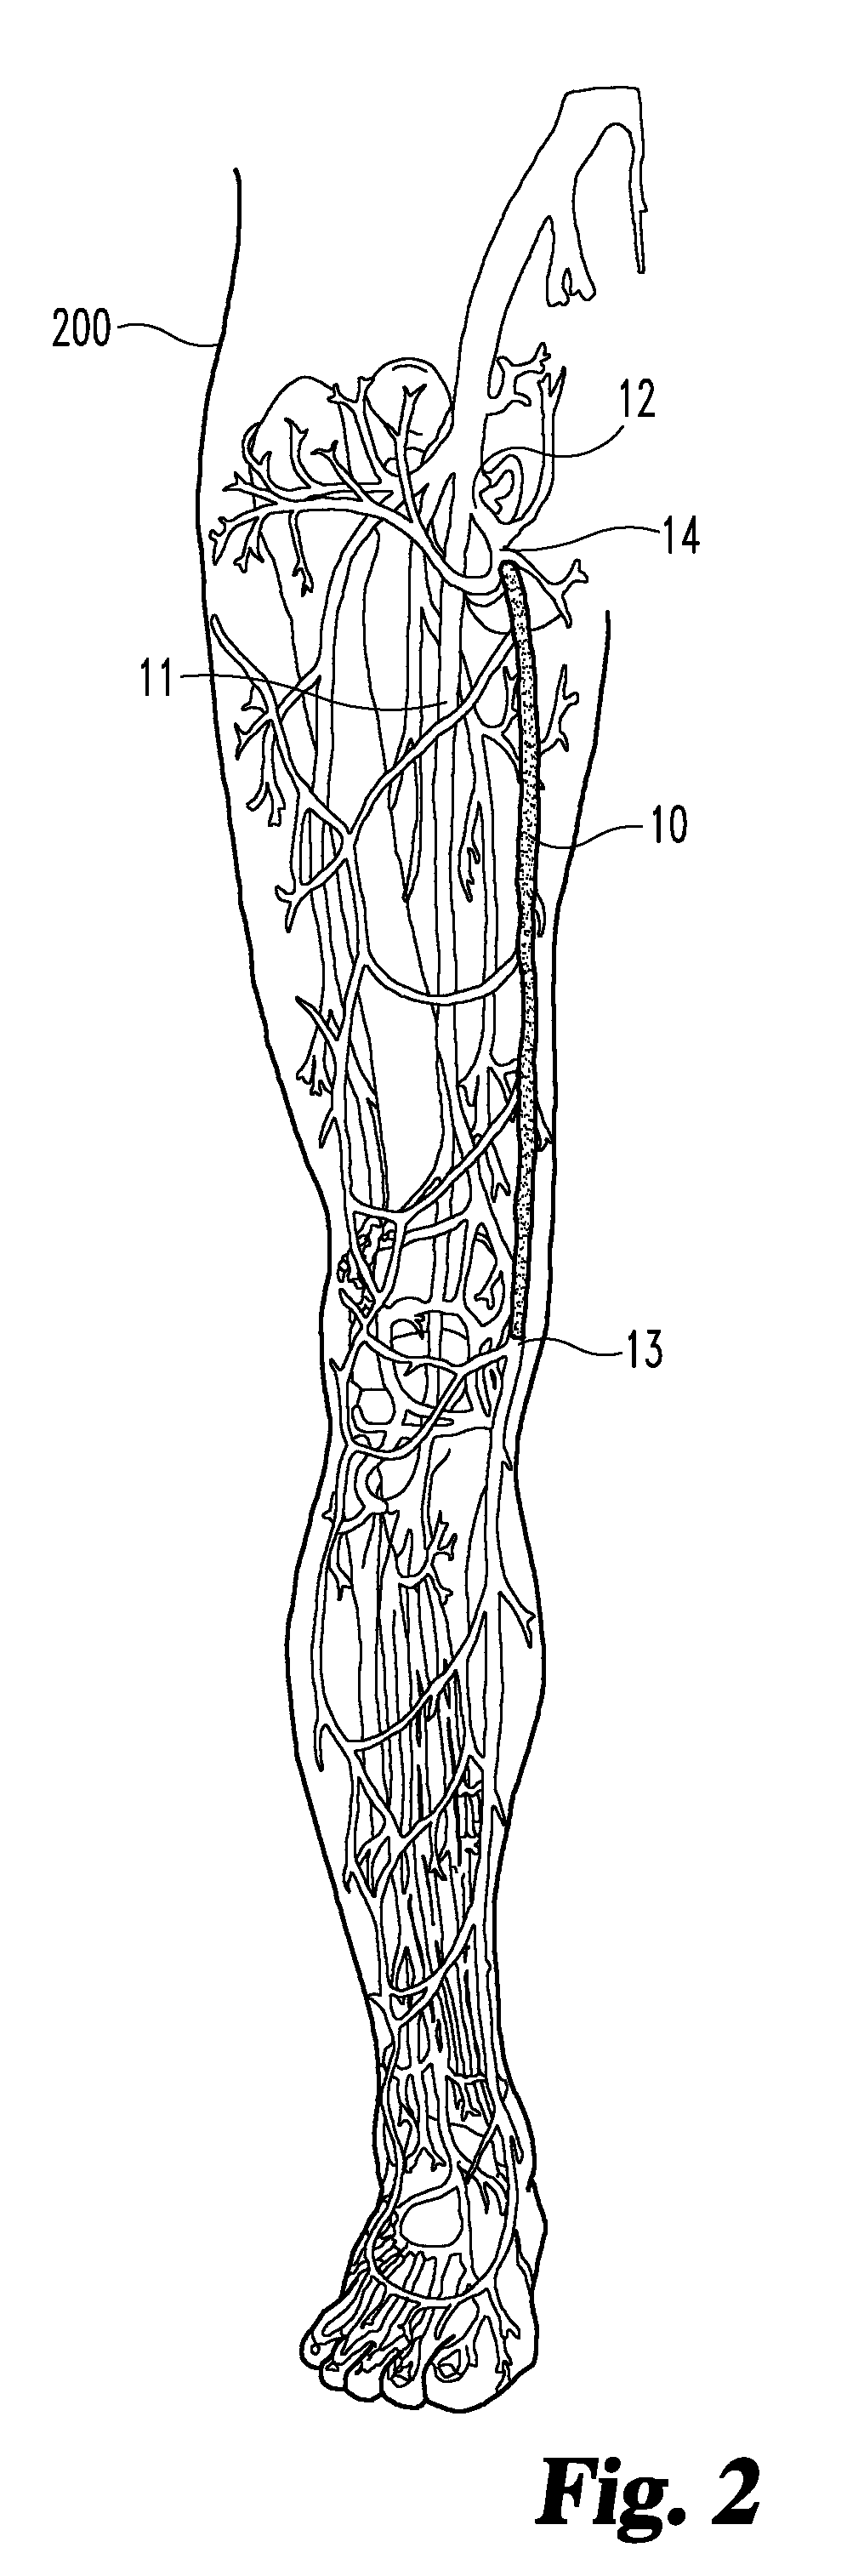 Enhanced remodelable materials for occluding bodily vessels and related methods and systems